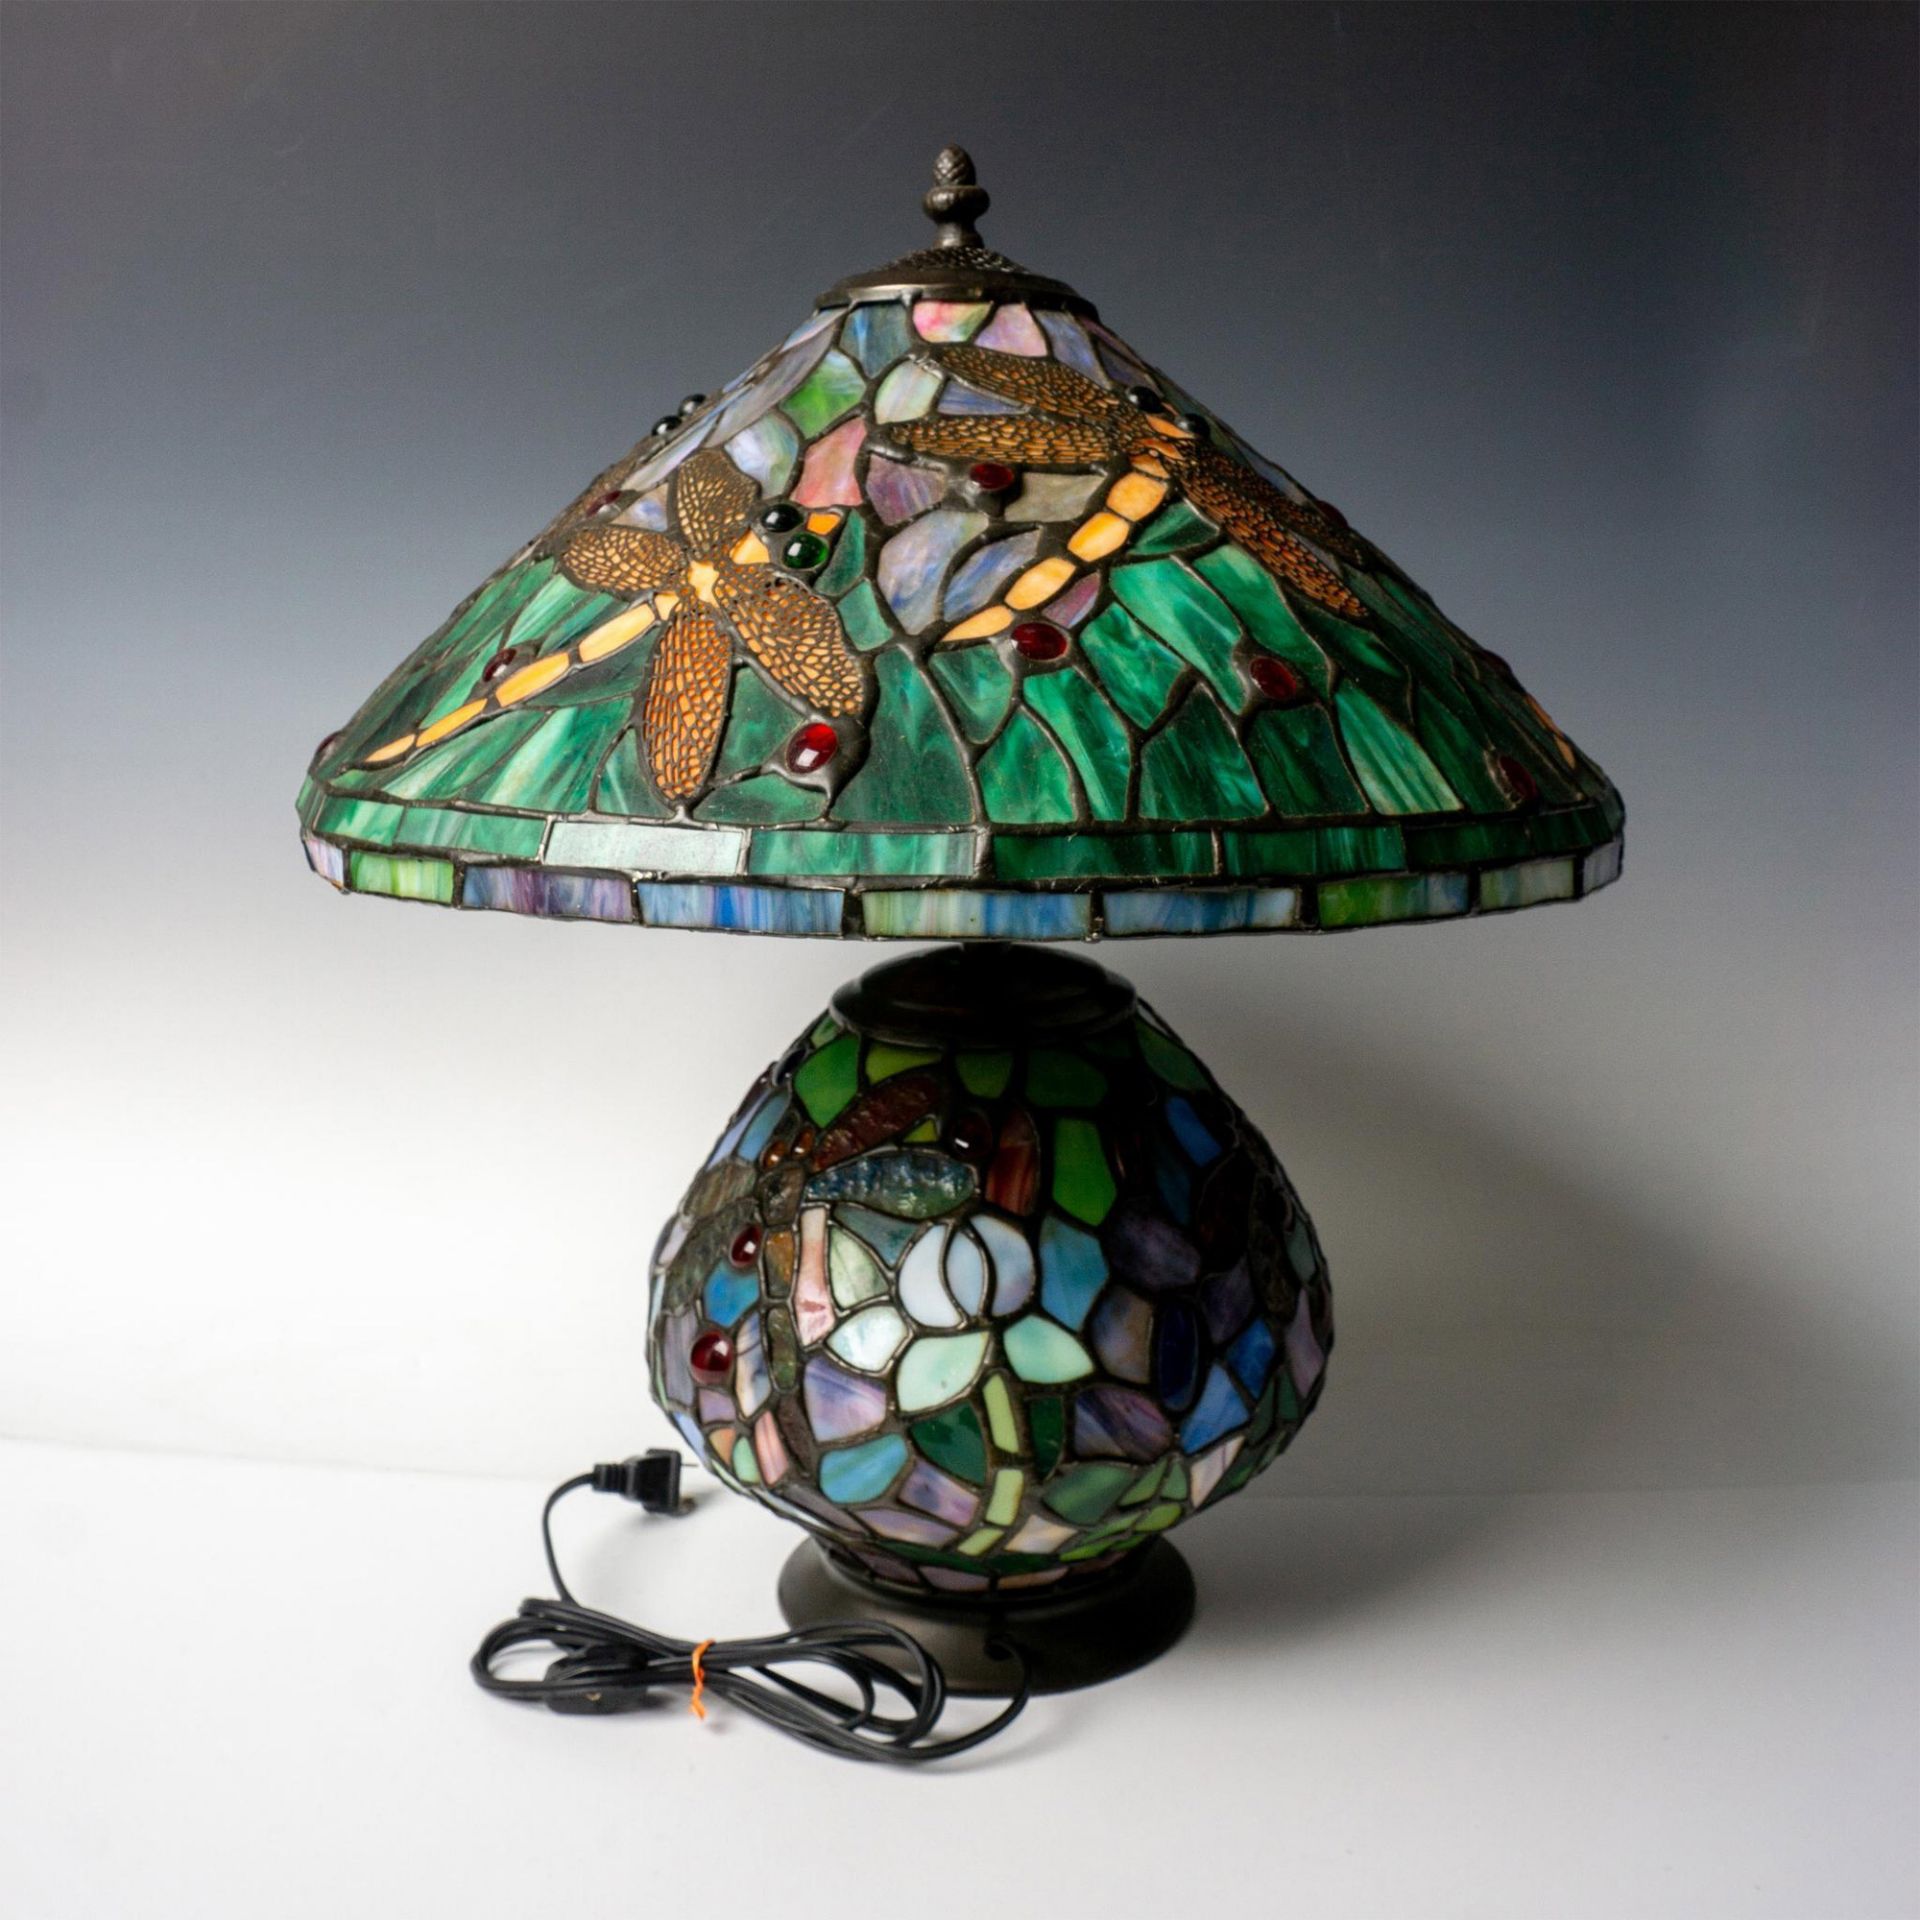 Tiffany Style-Stained Glass Dragonfly Lamp & Shade - Image 3 of 5